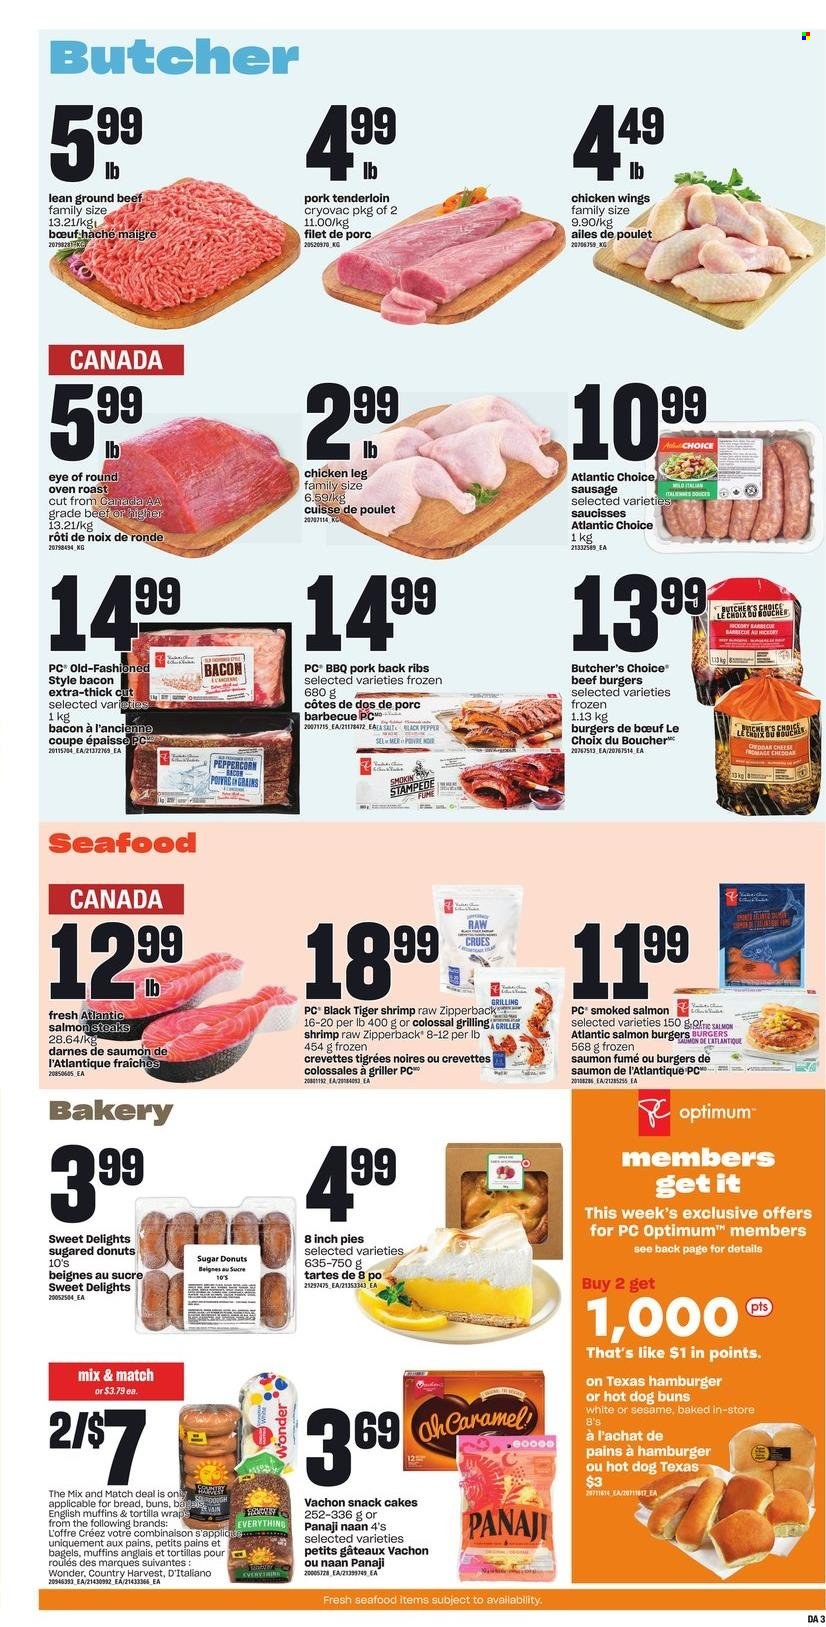 thumbnail - Dominion Flyer - May 19, 2022 - May 25, 2022 - Sales products - bagels, english muffins, tortillas, cake, buns, donut, salmon, smoked salmon, seafood, shrimps, beef burger, bacon, sausage, cheese, Country Harvest, chicken wings, snack, sugar, pepper, chicken legs, beef meat, ground beef, eye of round, pork meat, pork ribs, pork tenderloin, pork back ribs, Optimum, steak. Page 4.